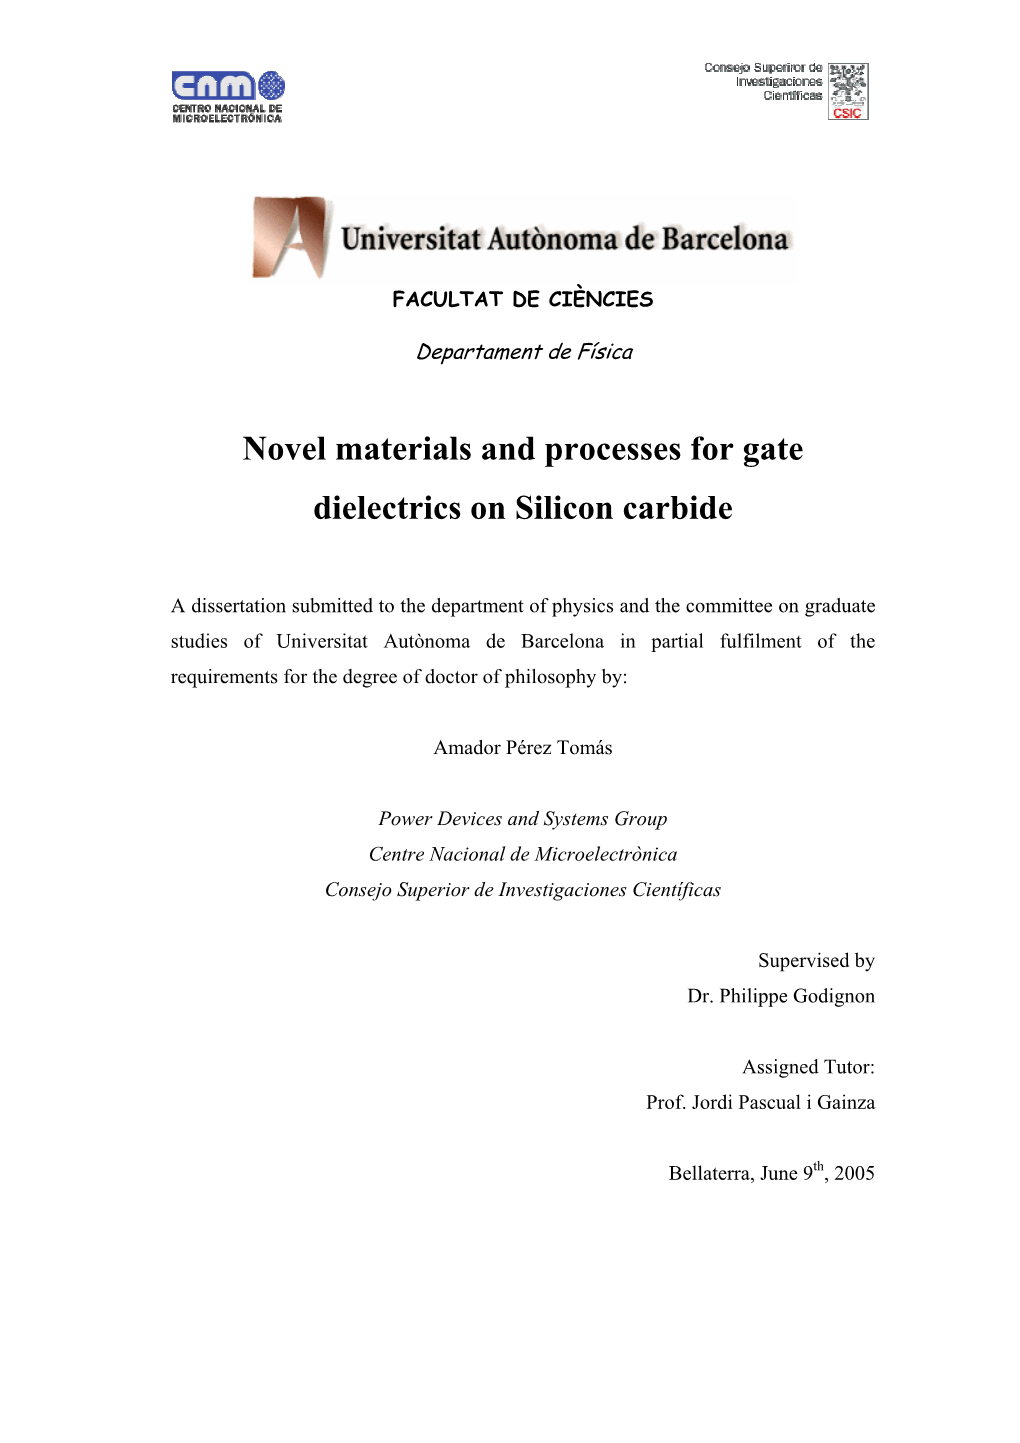 Novel Materials and Processes for Gate Dielectrics on Silicon Carbide